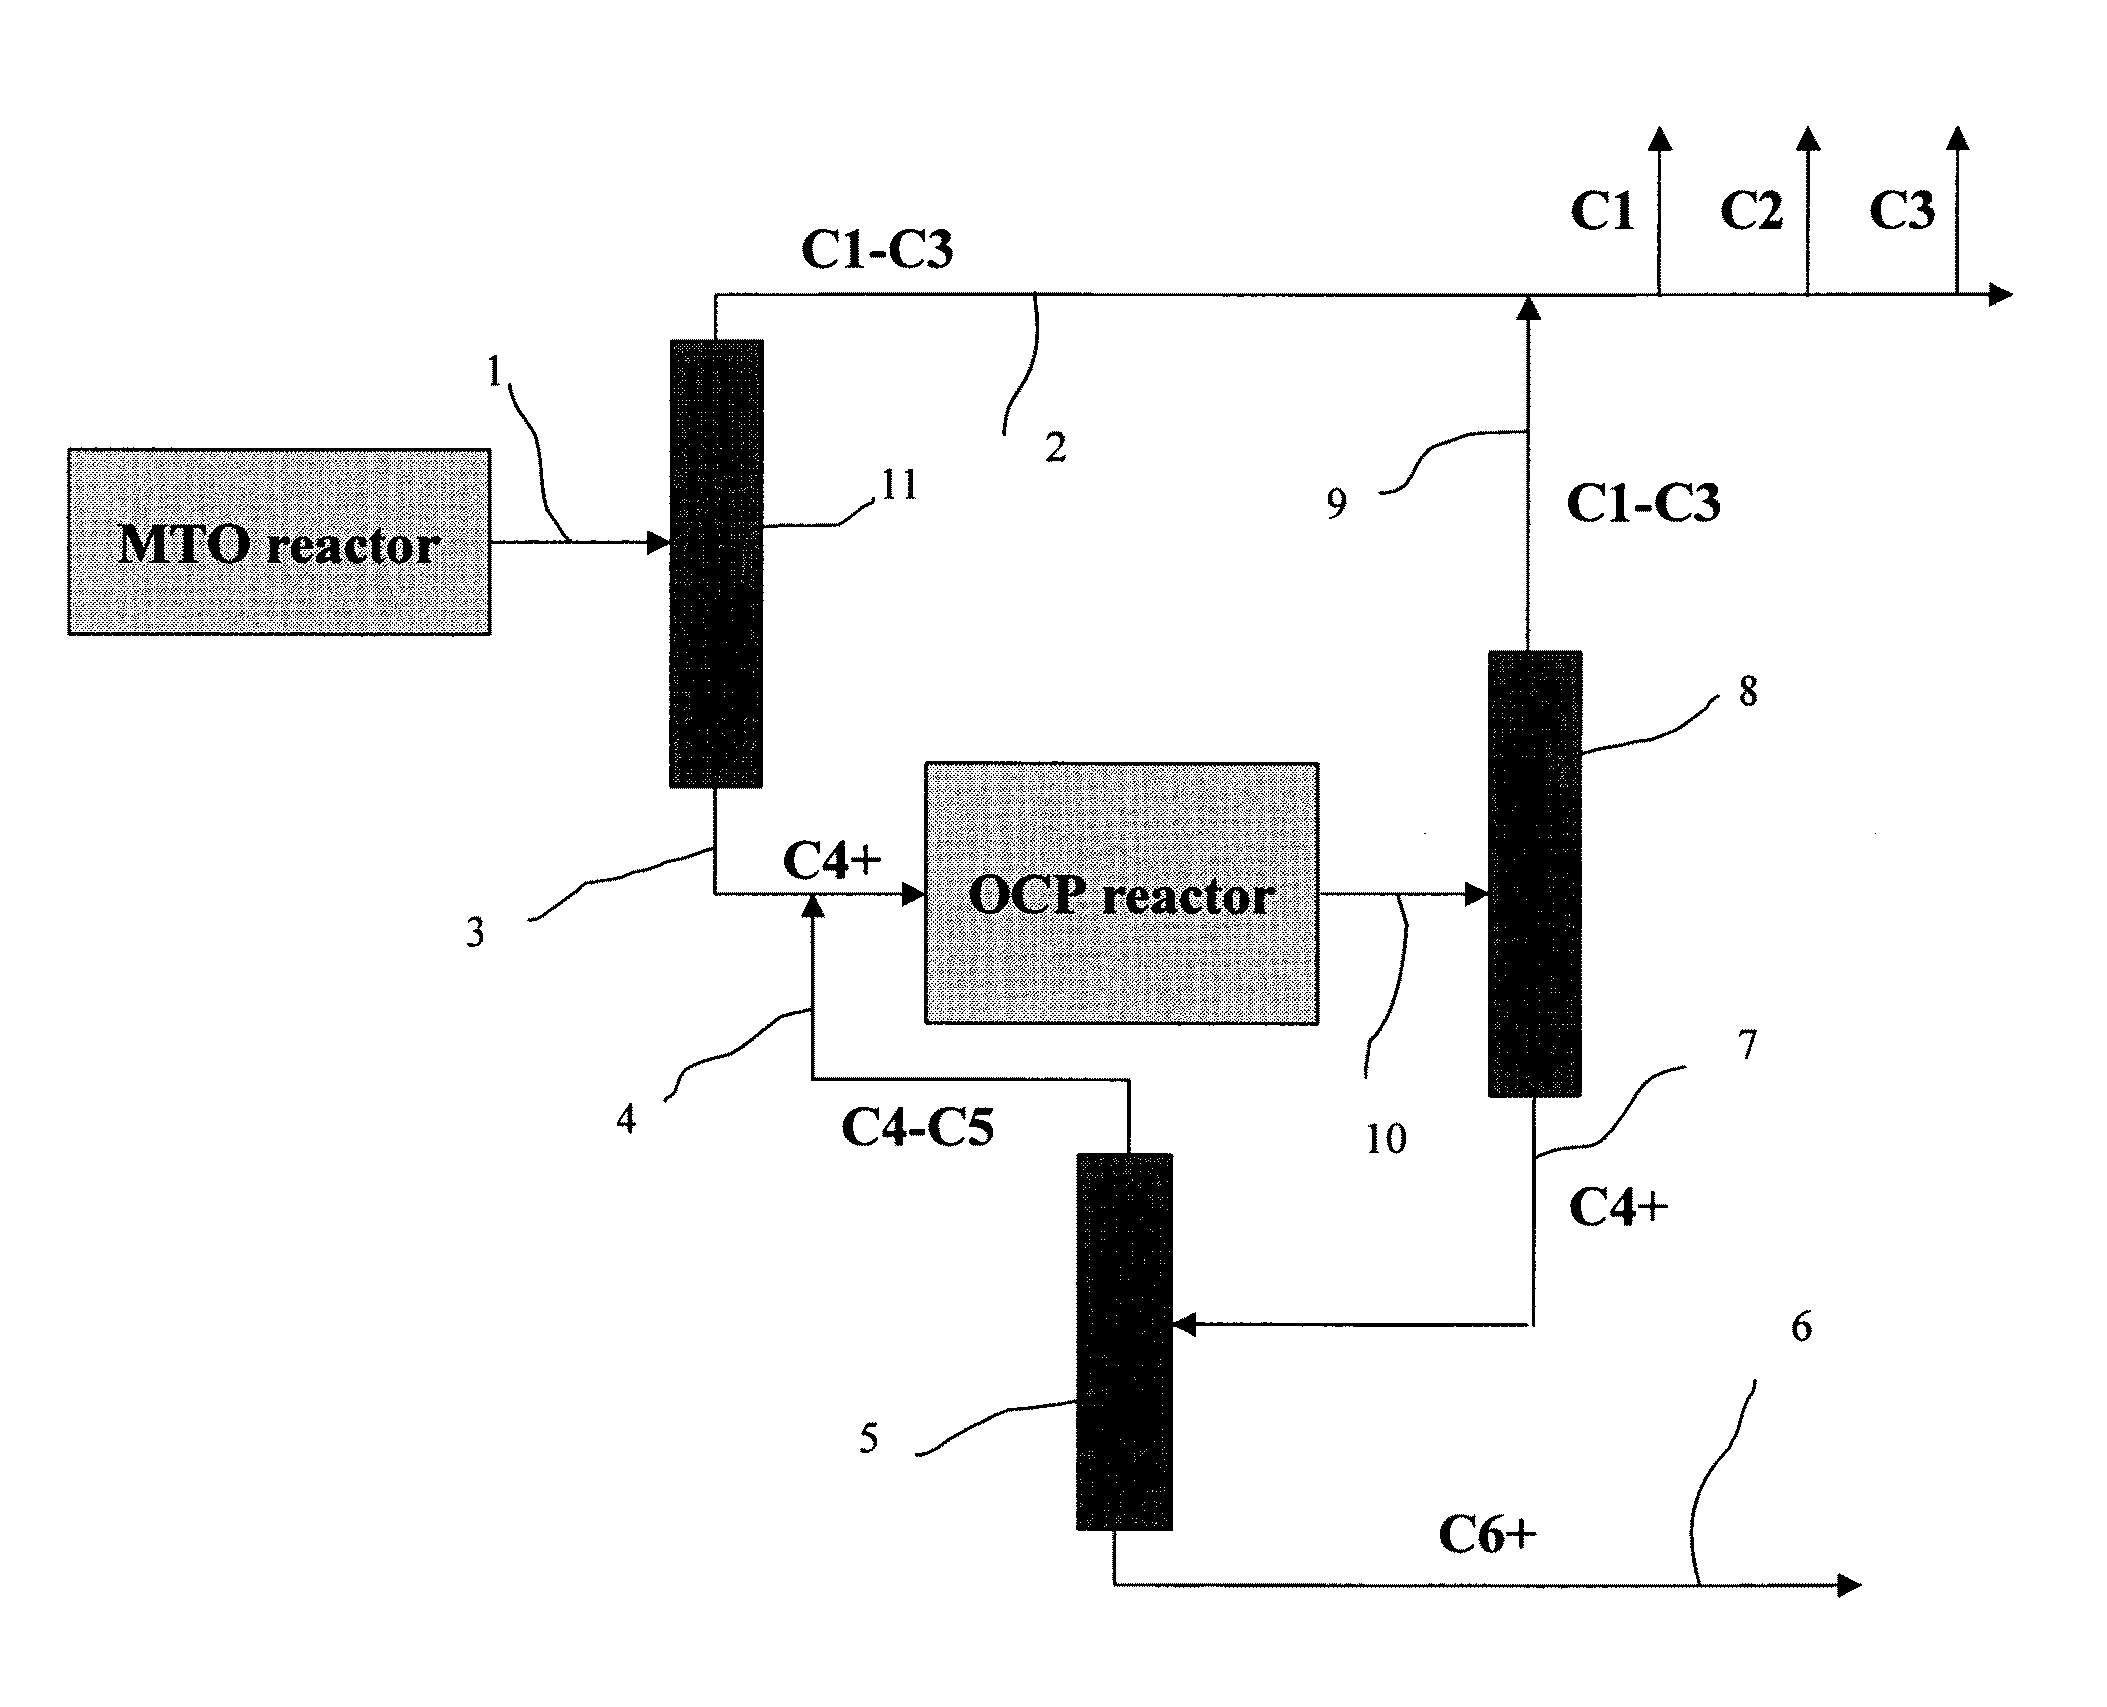 Process for Obtaining a Catalyst Composite